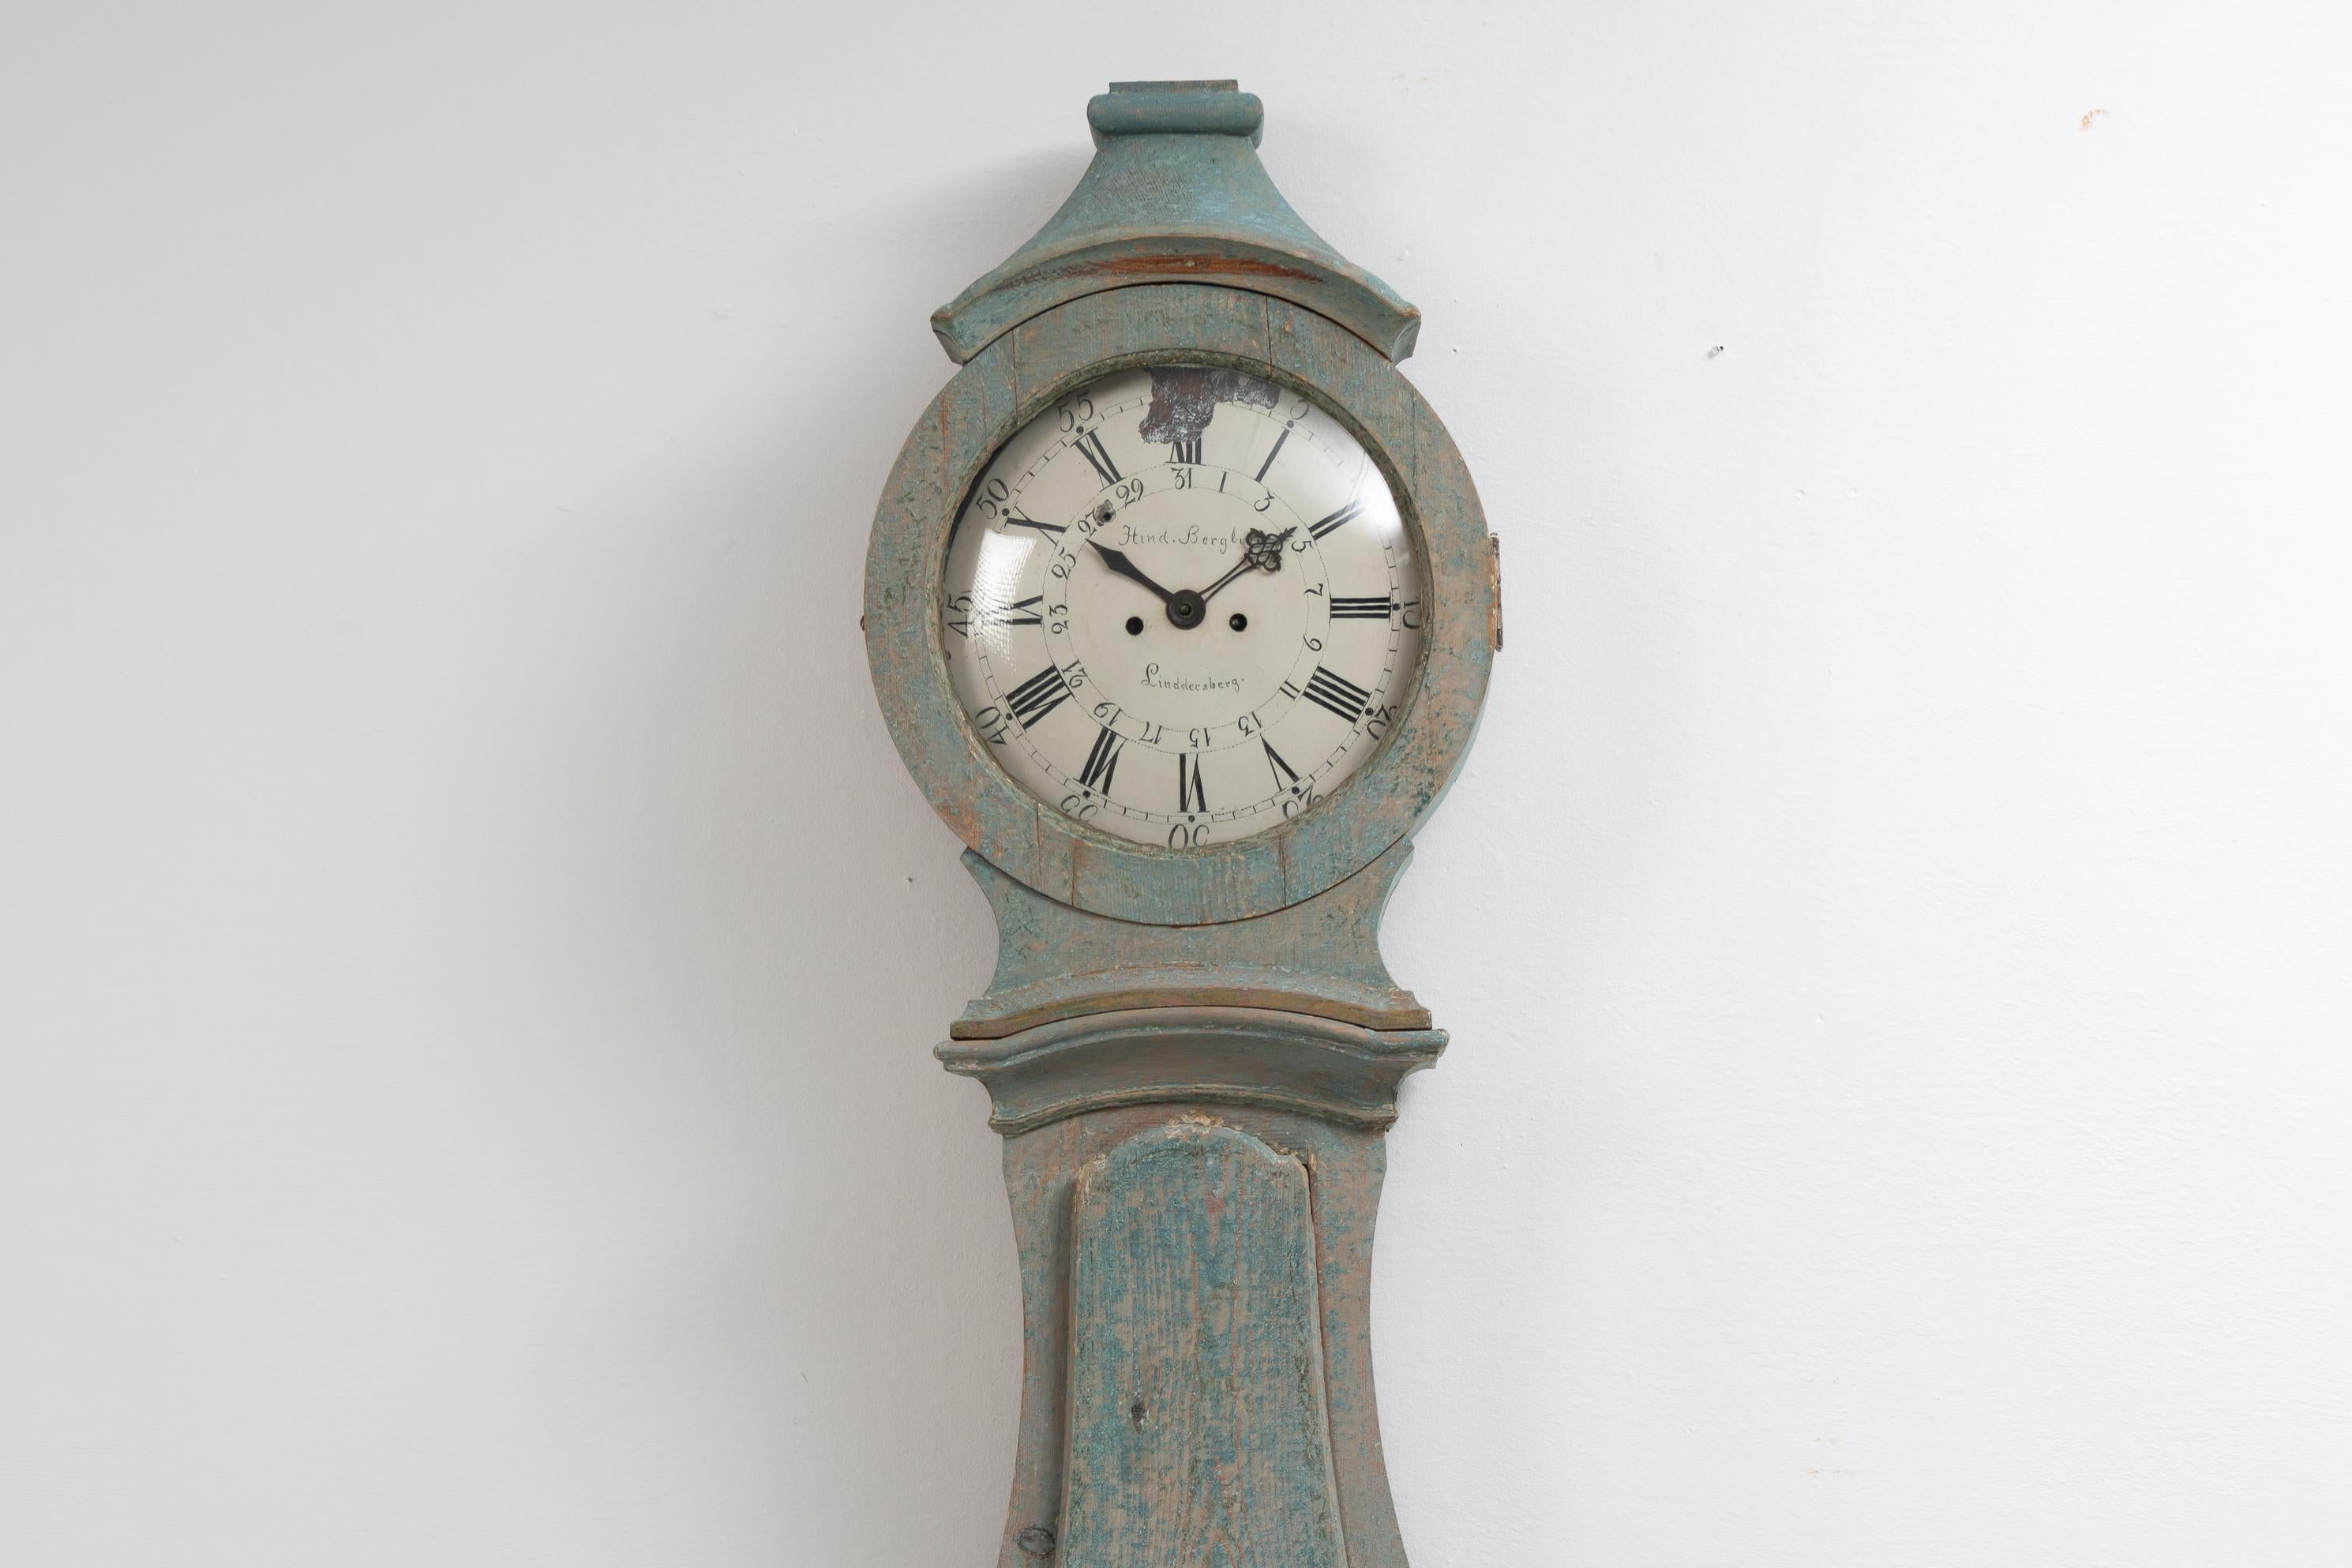 Swedish long case clock from Mälardalen, close to Stockholm. The clock is from around 1790 and the case has the classic rococo shape. The surface of the clock has been scraped to show the original first layer of light blue paint. An unusual detail